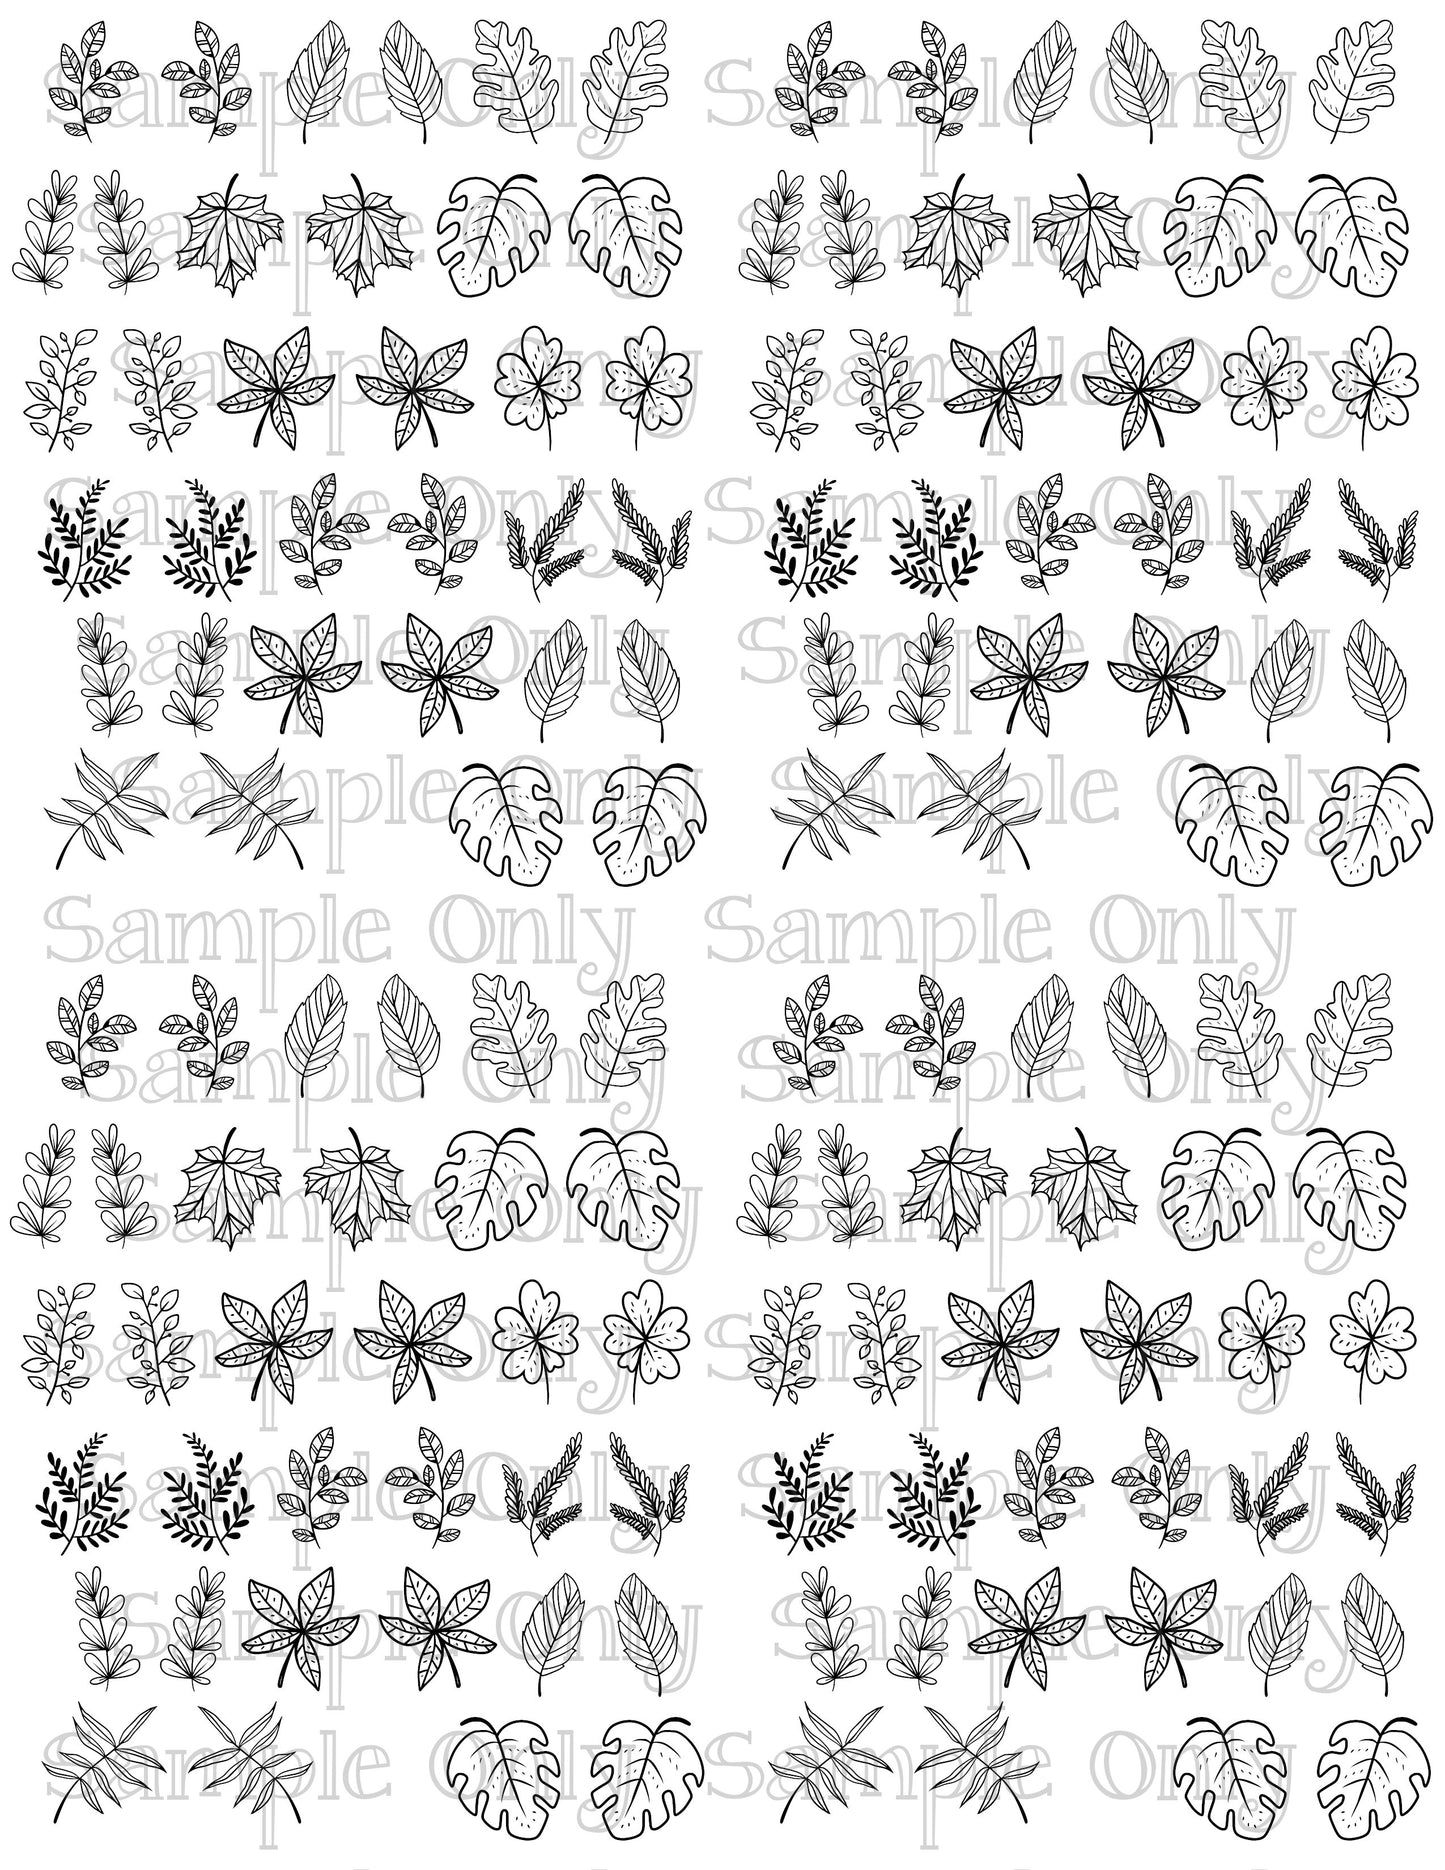 .75 Inch Tropical Leaves Image Sheet For Polymer Clay Transfer Decal DIGITAL FILE OR PRINTED